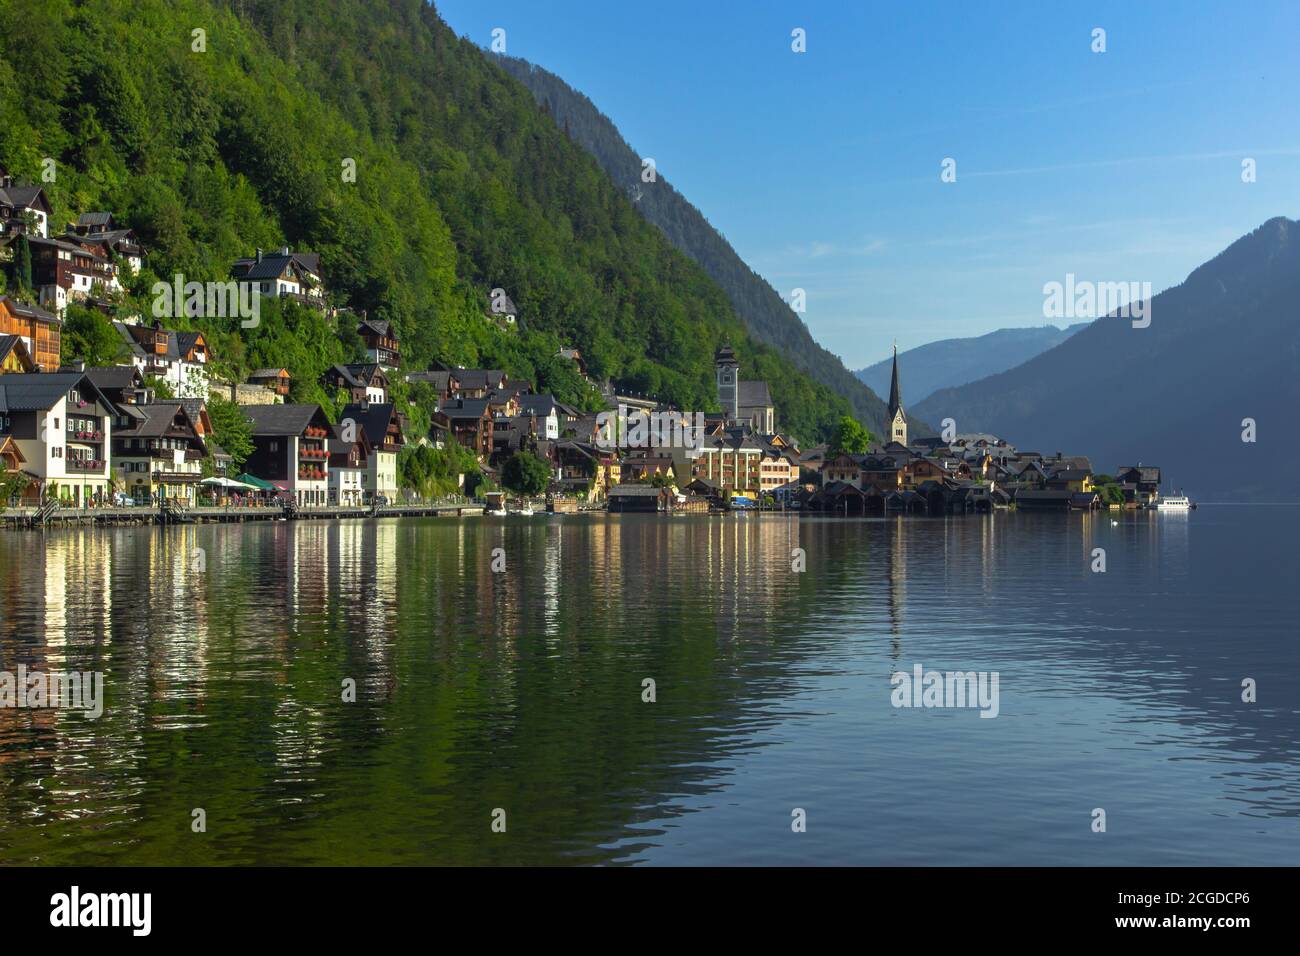 Classic postcard view of famous Hallstatt lakeside town, Austria. Scenic panoramic view of beautiful town reflecting in Hallstatter See. Stock Photo